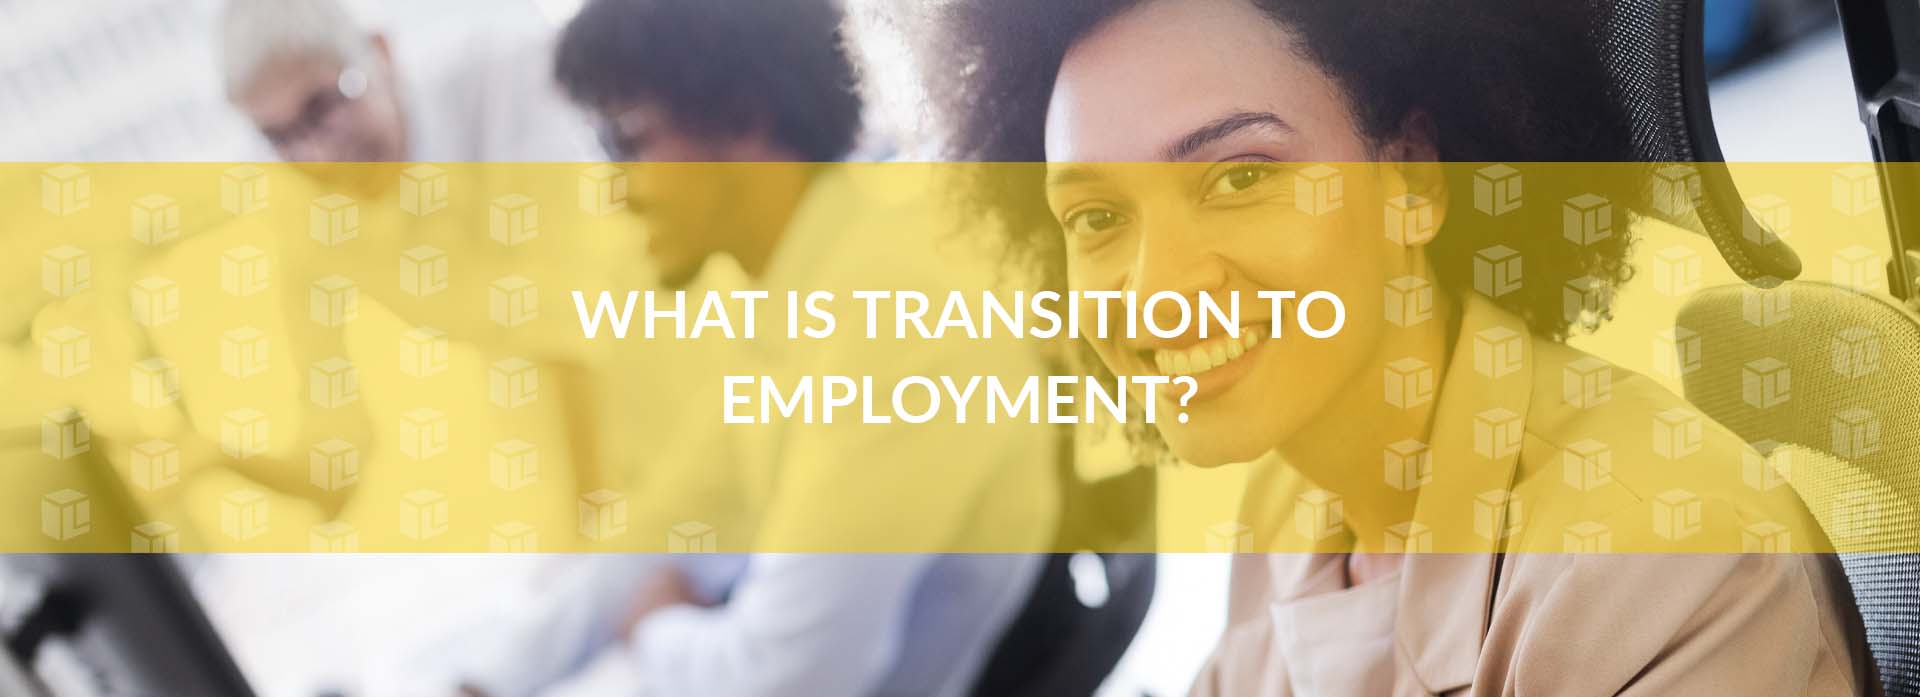 What Is Transition To Employment?